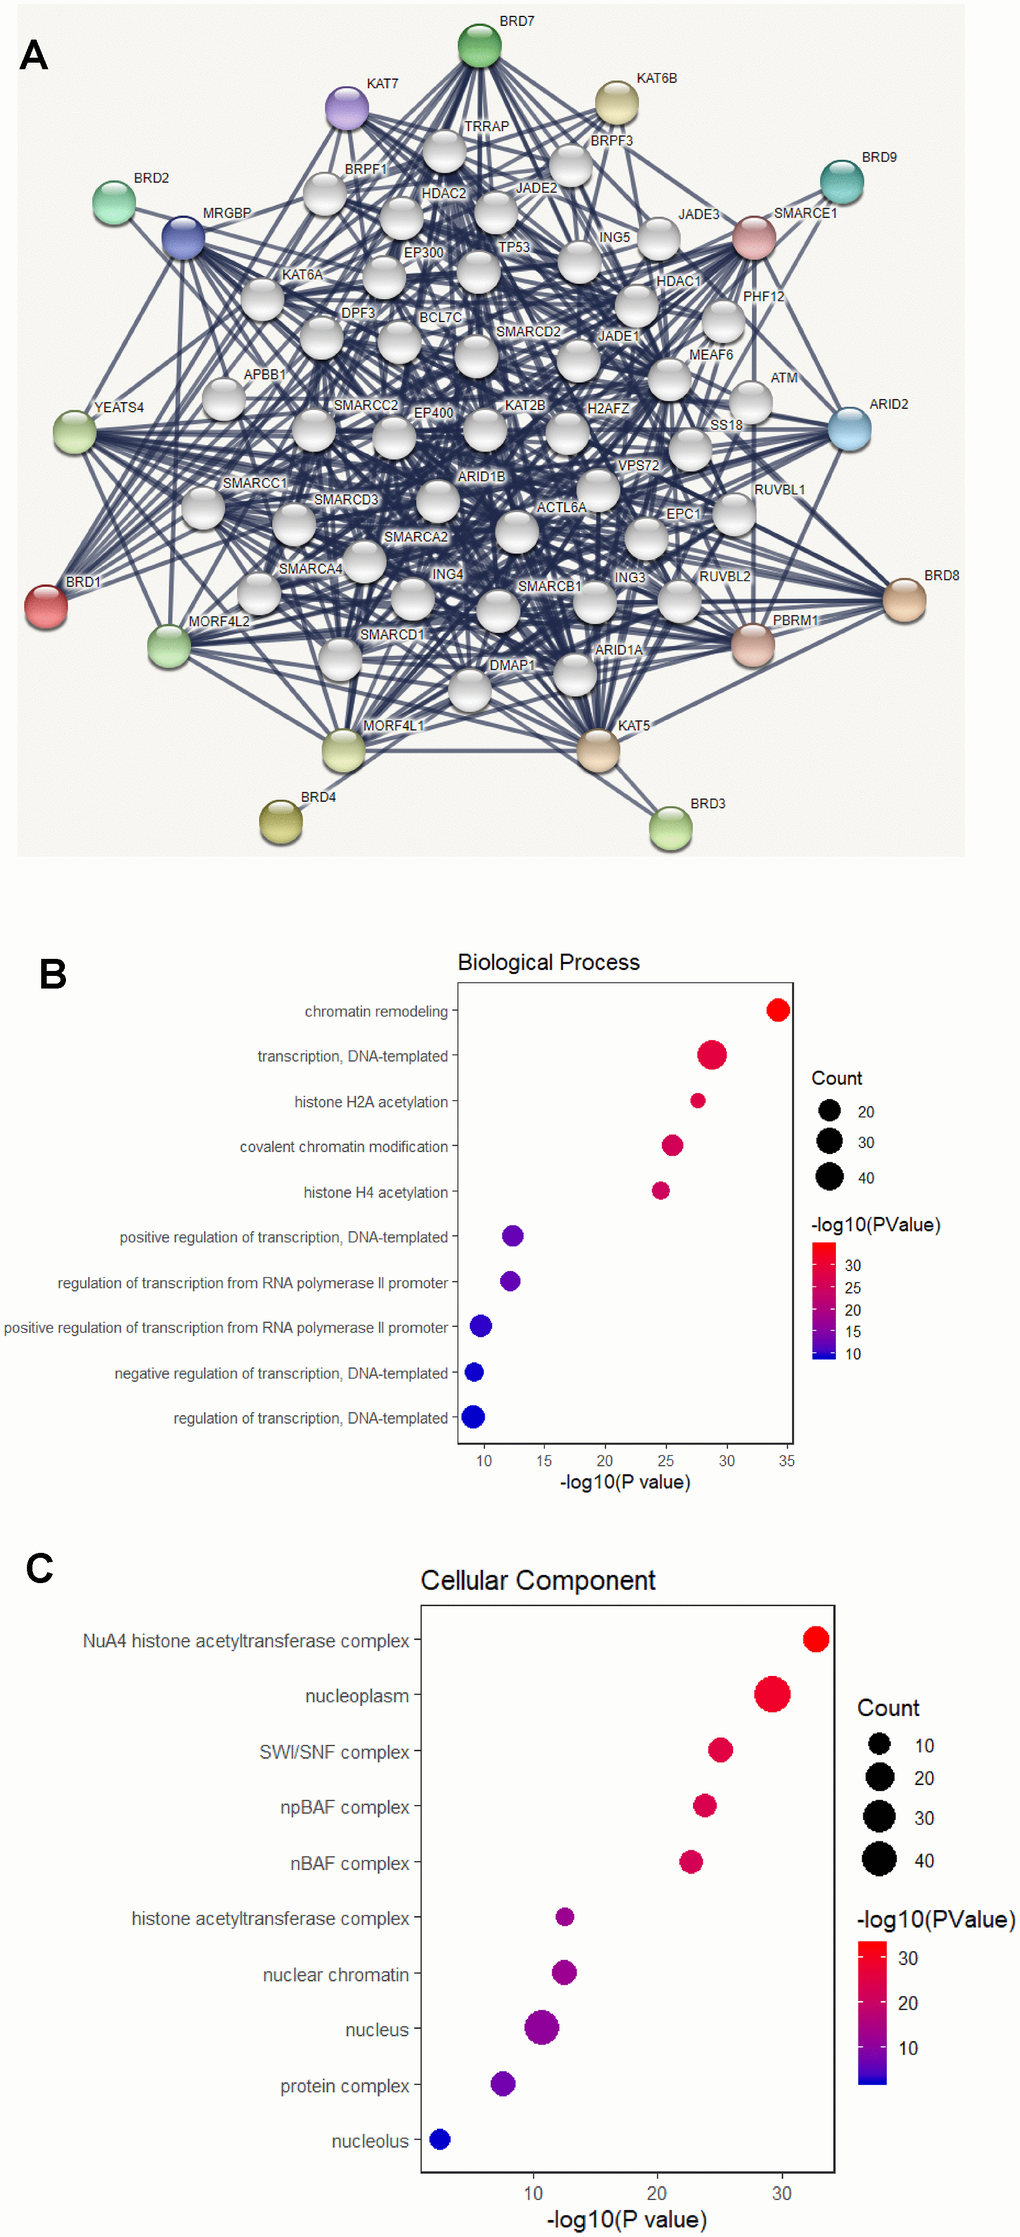 Functional protein interaction network of BRD-containing protein genes (STRING and DAVID). (A) Protein interaction network of 50 functional partners with confidence score > 0.9 based on STRING database. BRD 1/2/3/4/7/8/9 are the seed genes. Ten interacting partners with the highest confident scores were colored and placed in the outer shell. The other forty interacting partners were grey and placed in the inner shell. The blue lines represent the correlation between proteins and the thickness of the lines indicates the strength of data support. (B–C) The bubble diagram displayed the GO functional enrichment results of the 50 functional interactors, including biological process and cellular components.